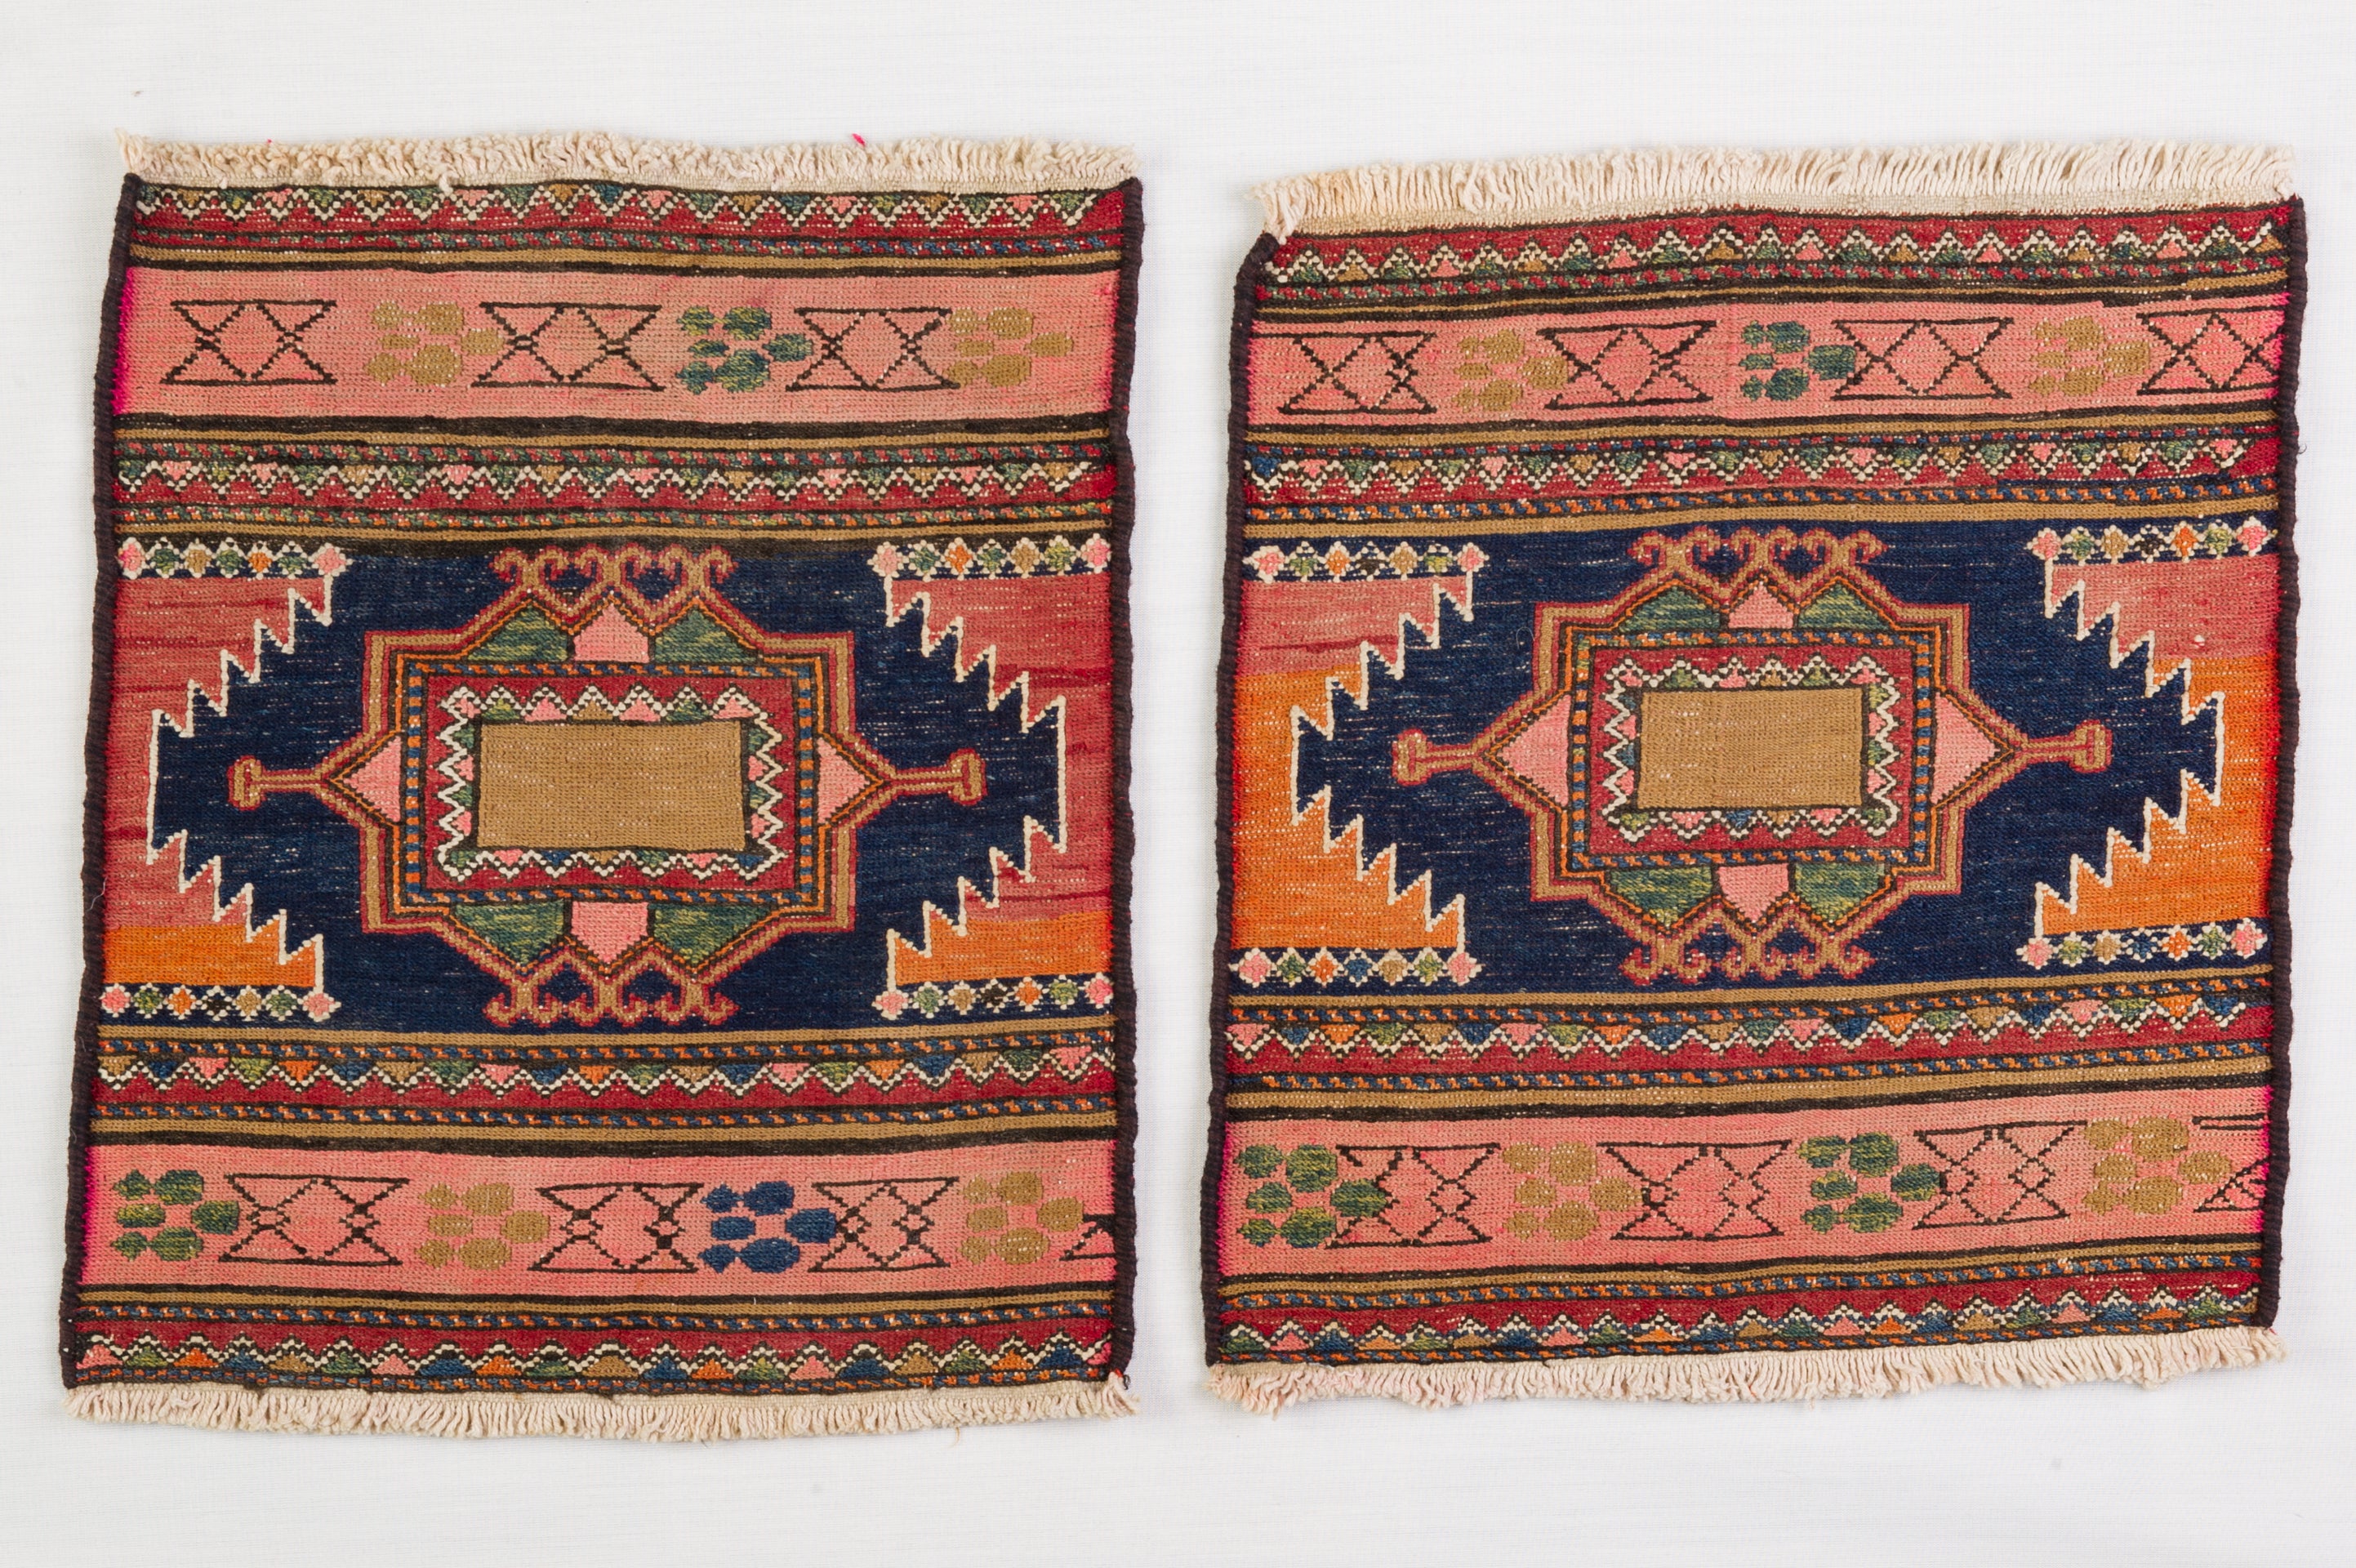 nr. 313 - These facades of saddlebags were made on a loom with a warp and weft basis; they are not two simple carpets, but recovered from an ancient nomadic saddlebag in the Caucasus mountains. High quality .
You can use on the wall (to admire) or